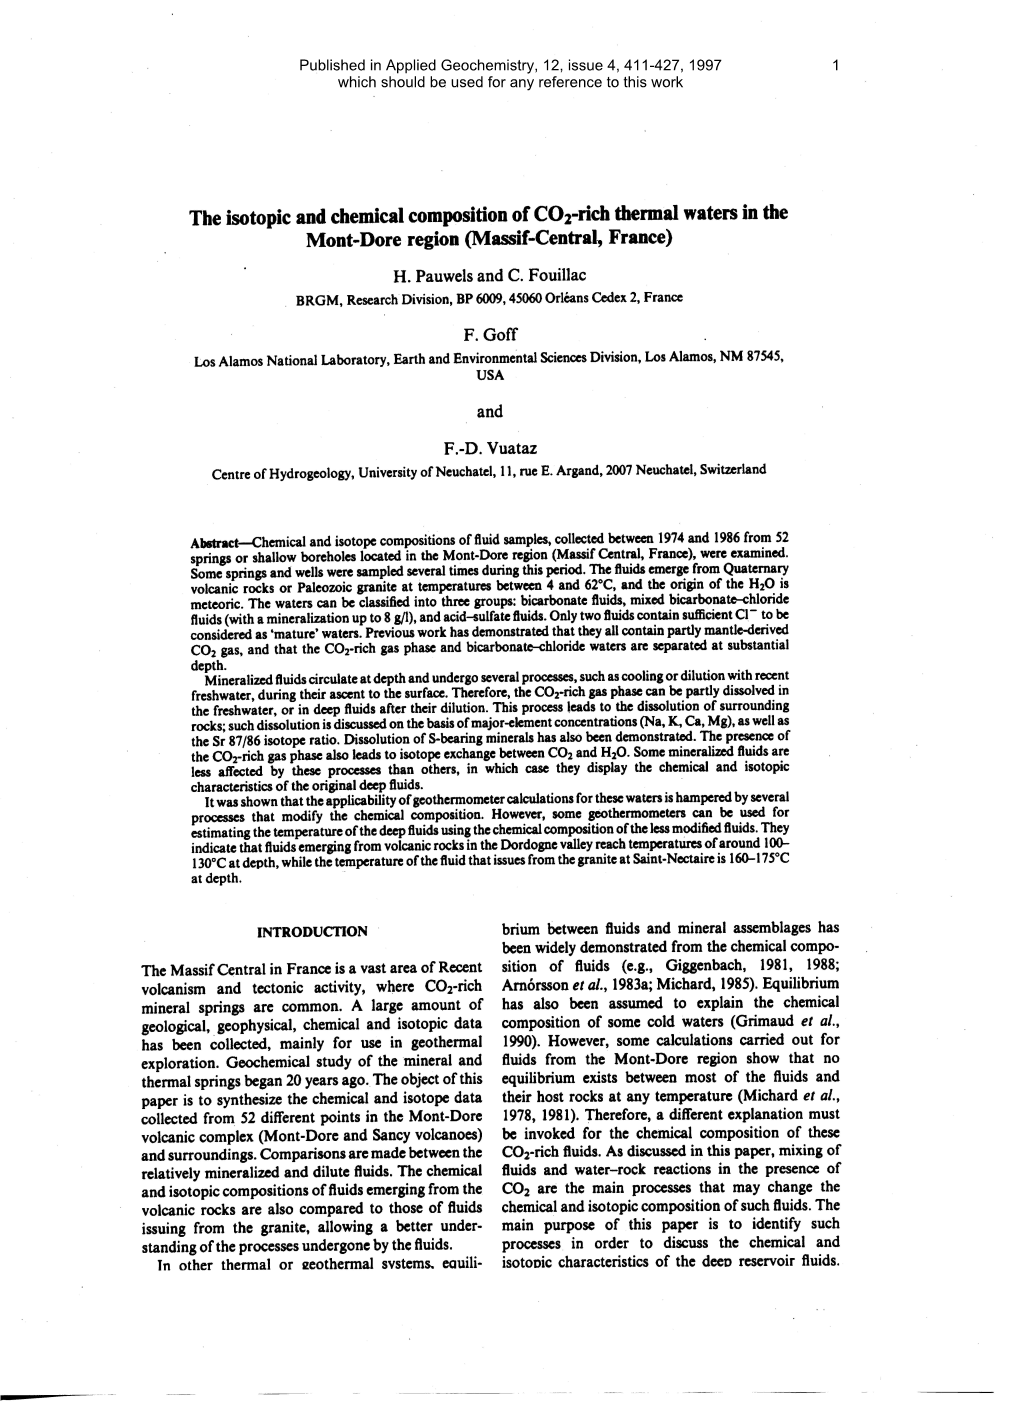 Published in Applied Geochemistry, 12, Issue 4, 411-427, 1997 Which